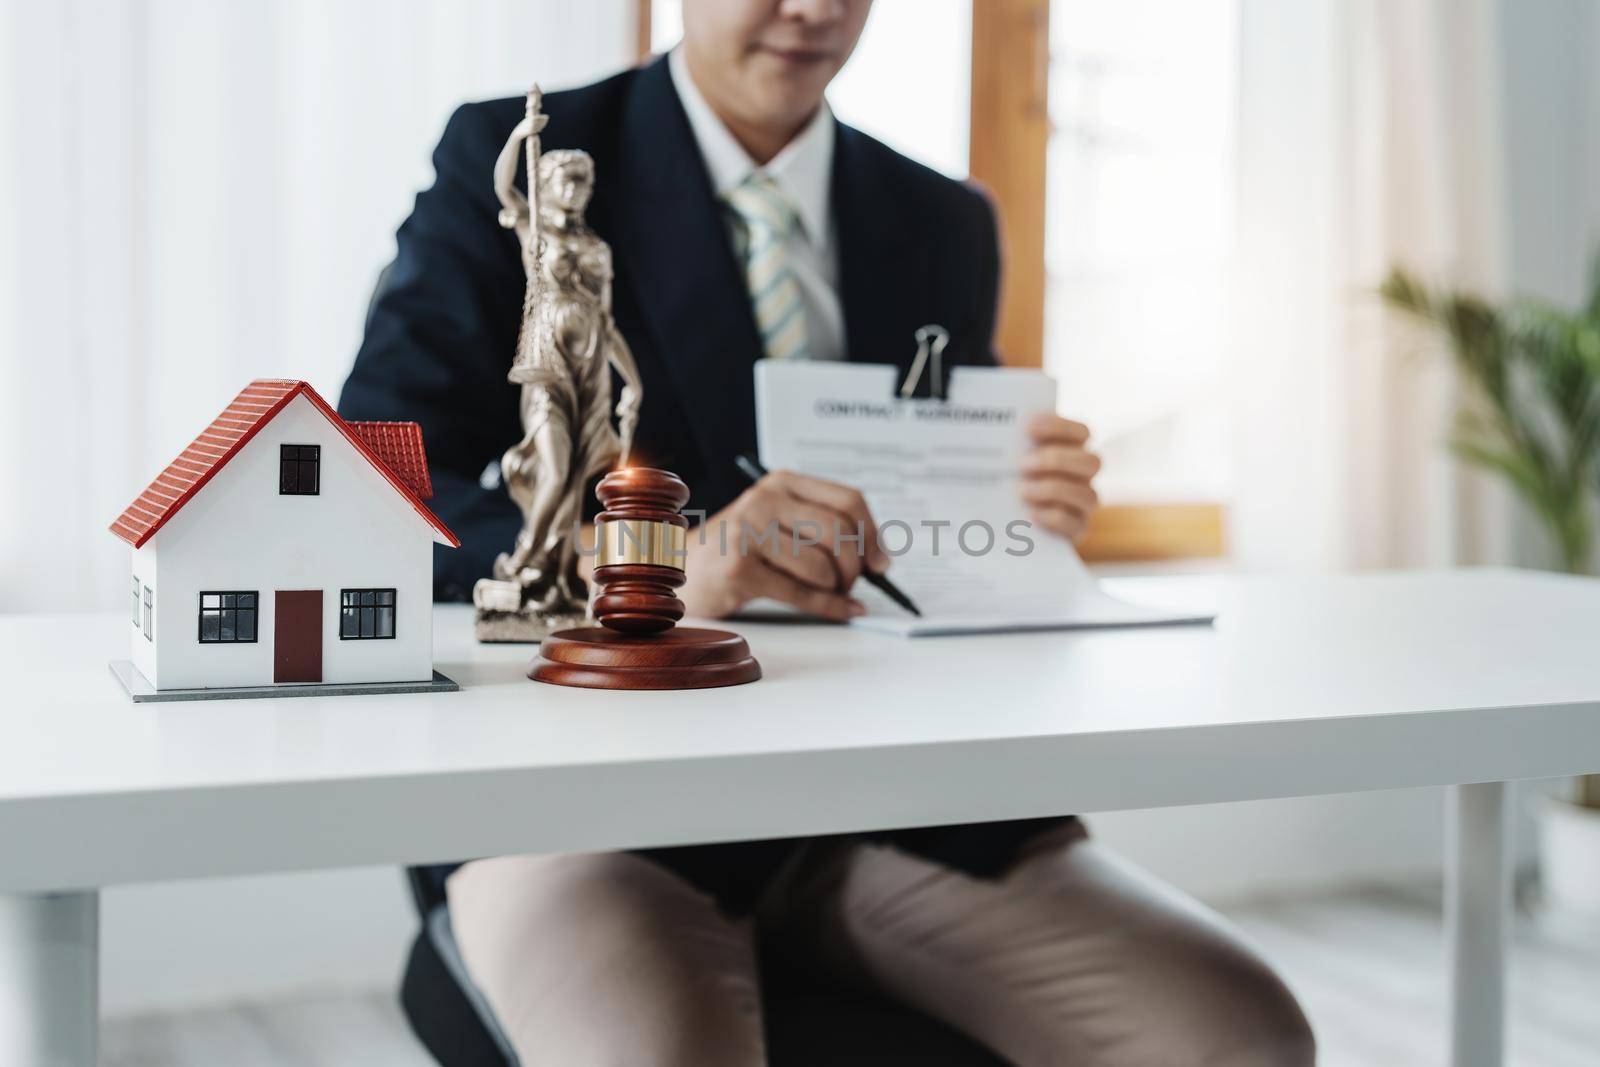 Law, Consultation, Agreement, Contract, Concept Attorney or lawyer focusing on the court hammer is sitting on the chair with a client's complaint to determine the house and land in court by Manastrong